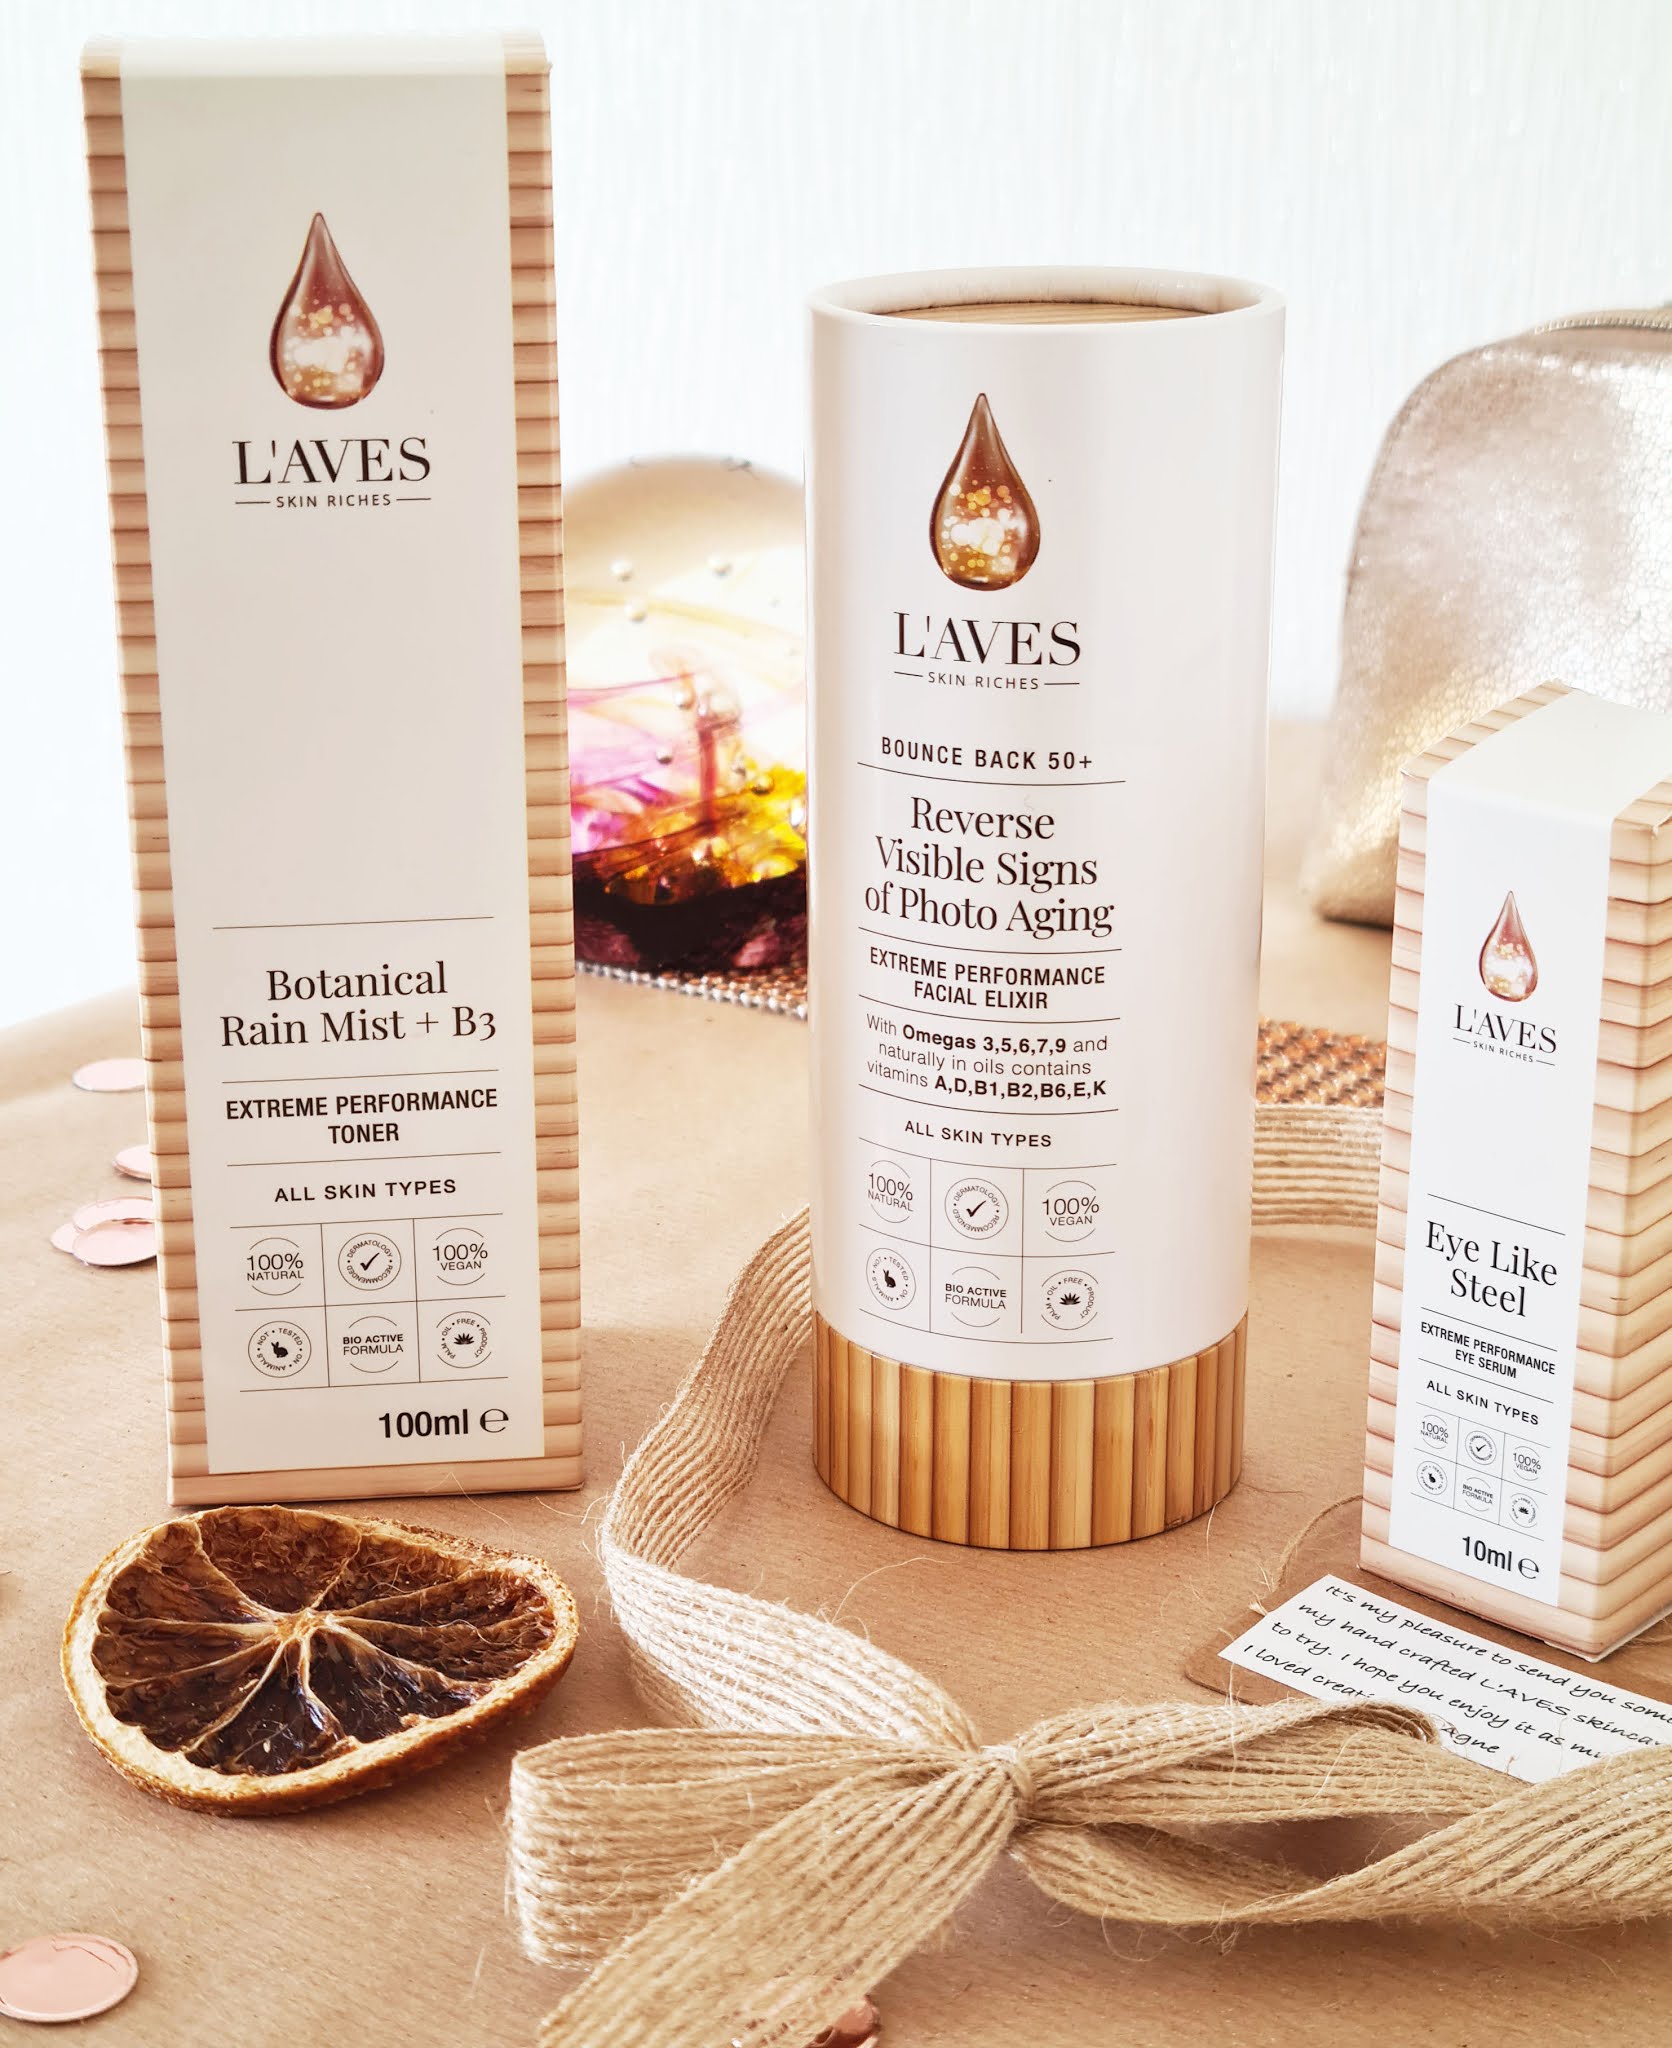 Products from the L'AVES vegan skincare ranges reviewed by Is This Mutton blog